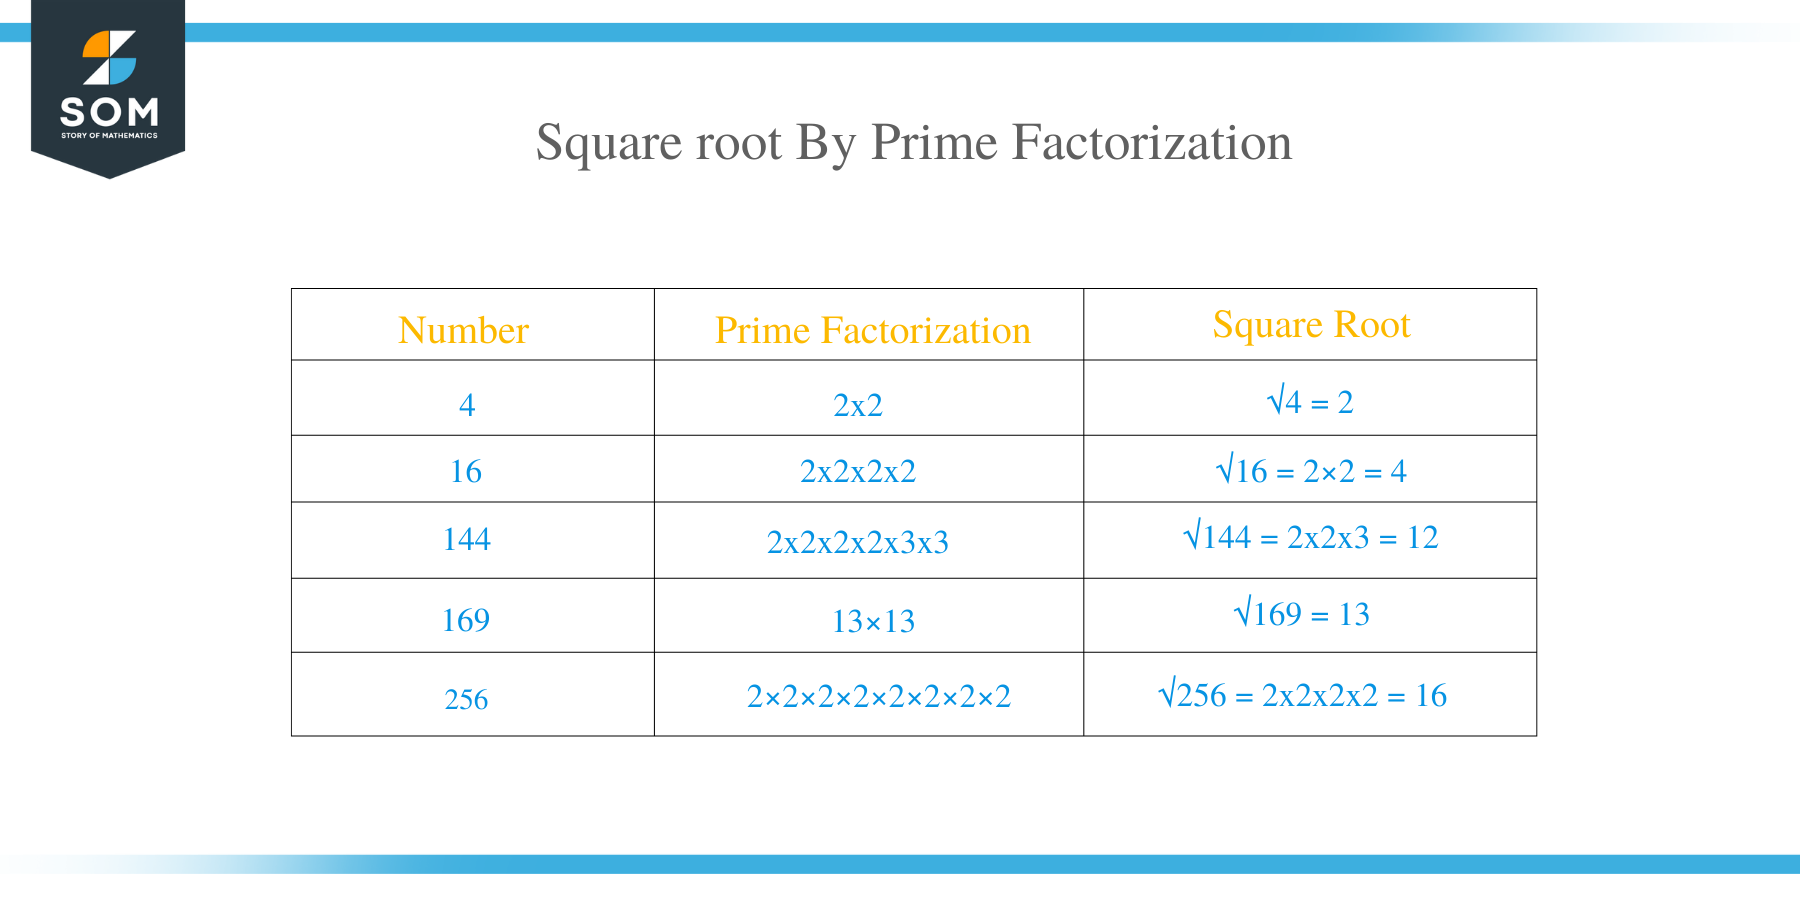 Square Root by Prime Factorization